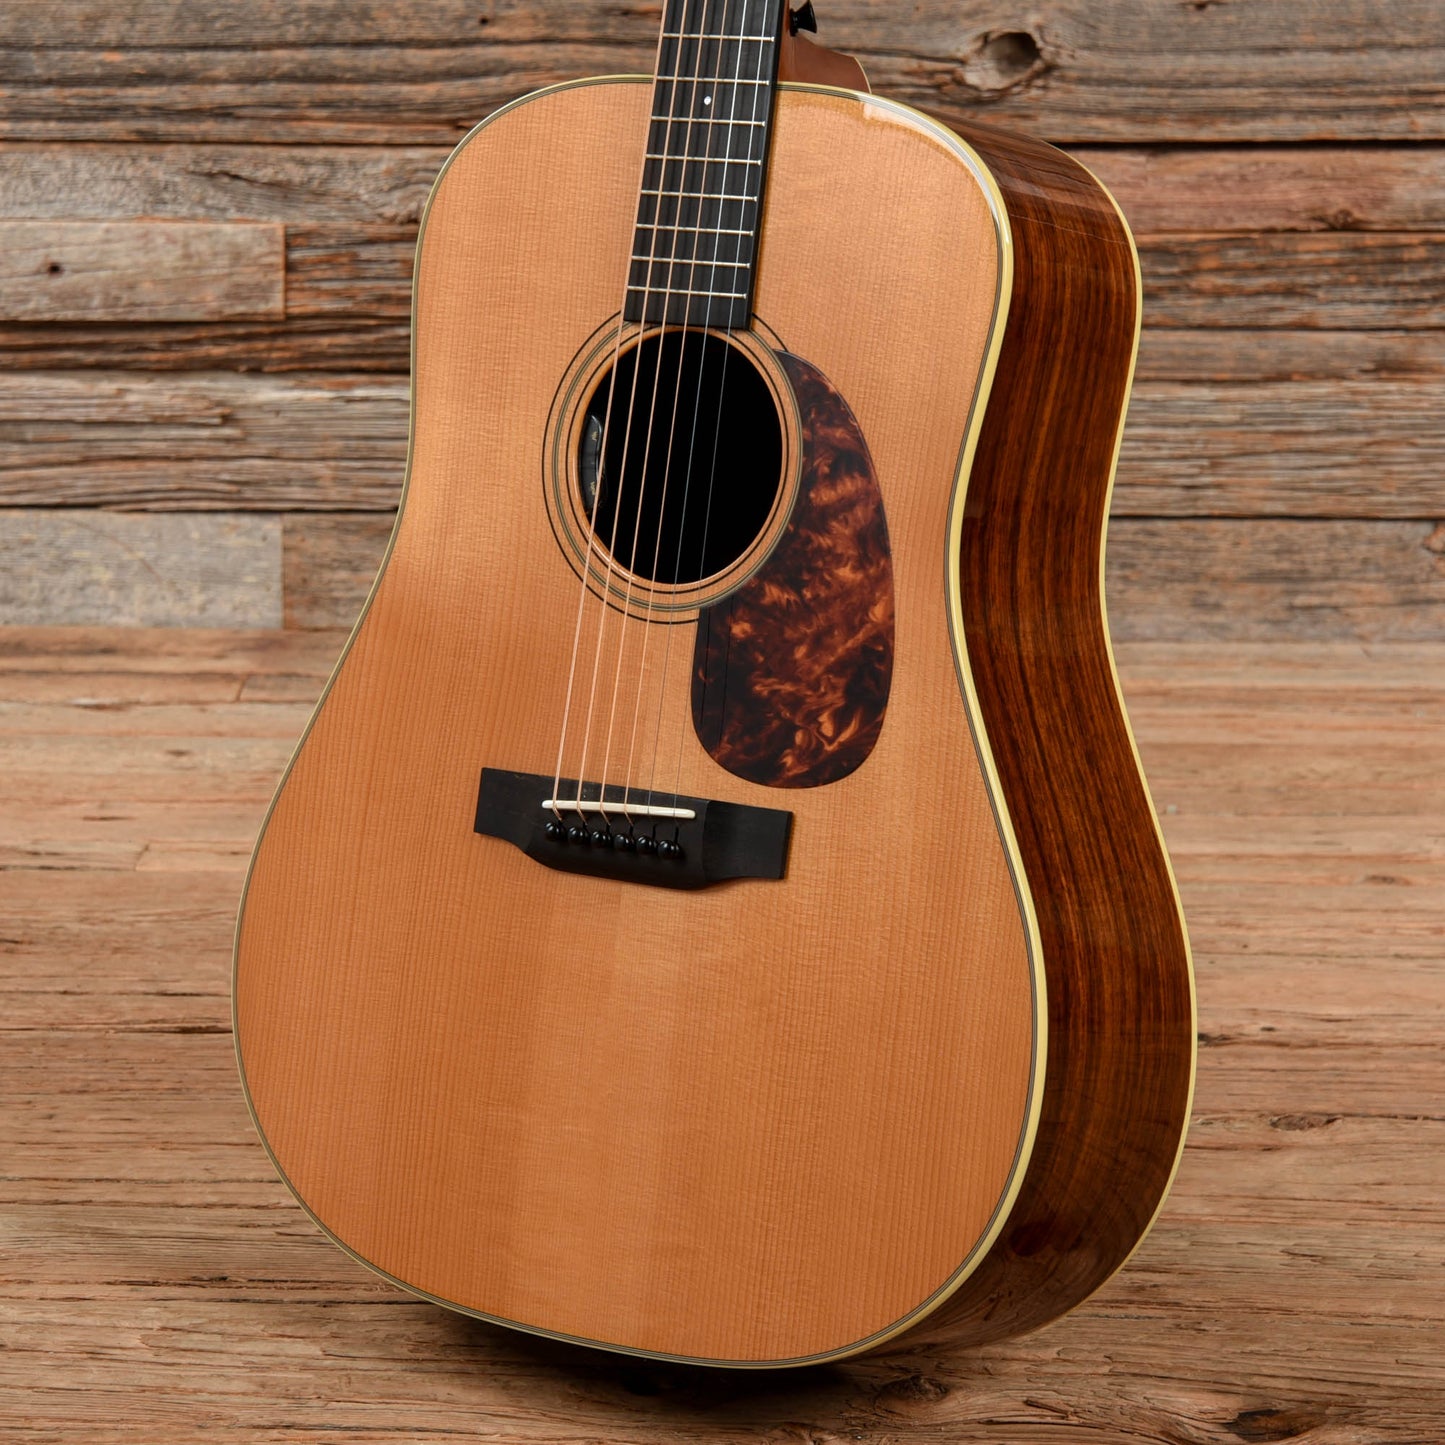 Breedlove Revival Series DR Deluxe Red Spruce/Rosewood Natural Acoustic Guitars / Dreadnought